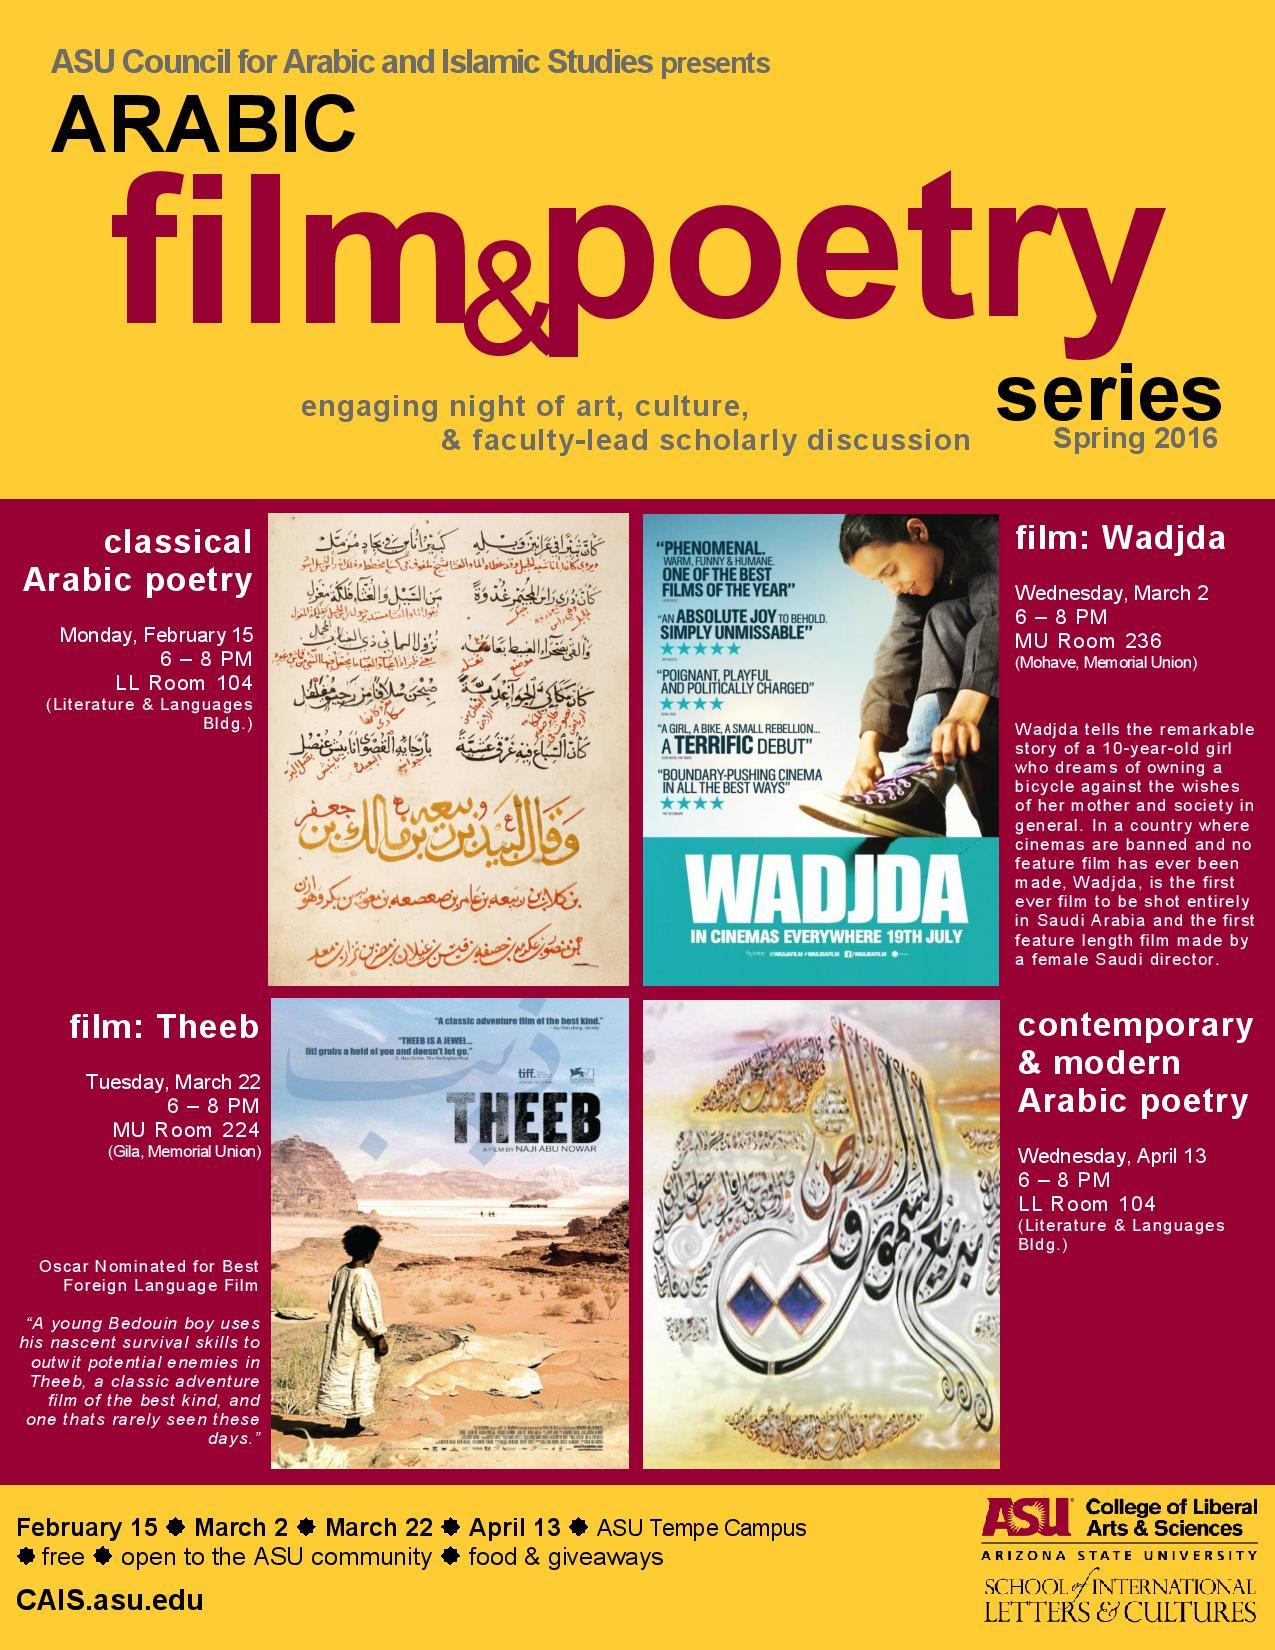 Arabic film and poetry series spring 2016 flyer